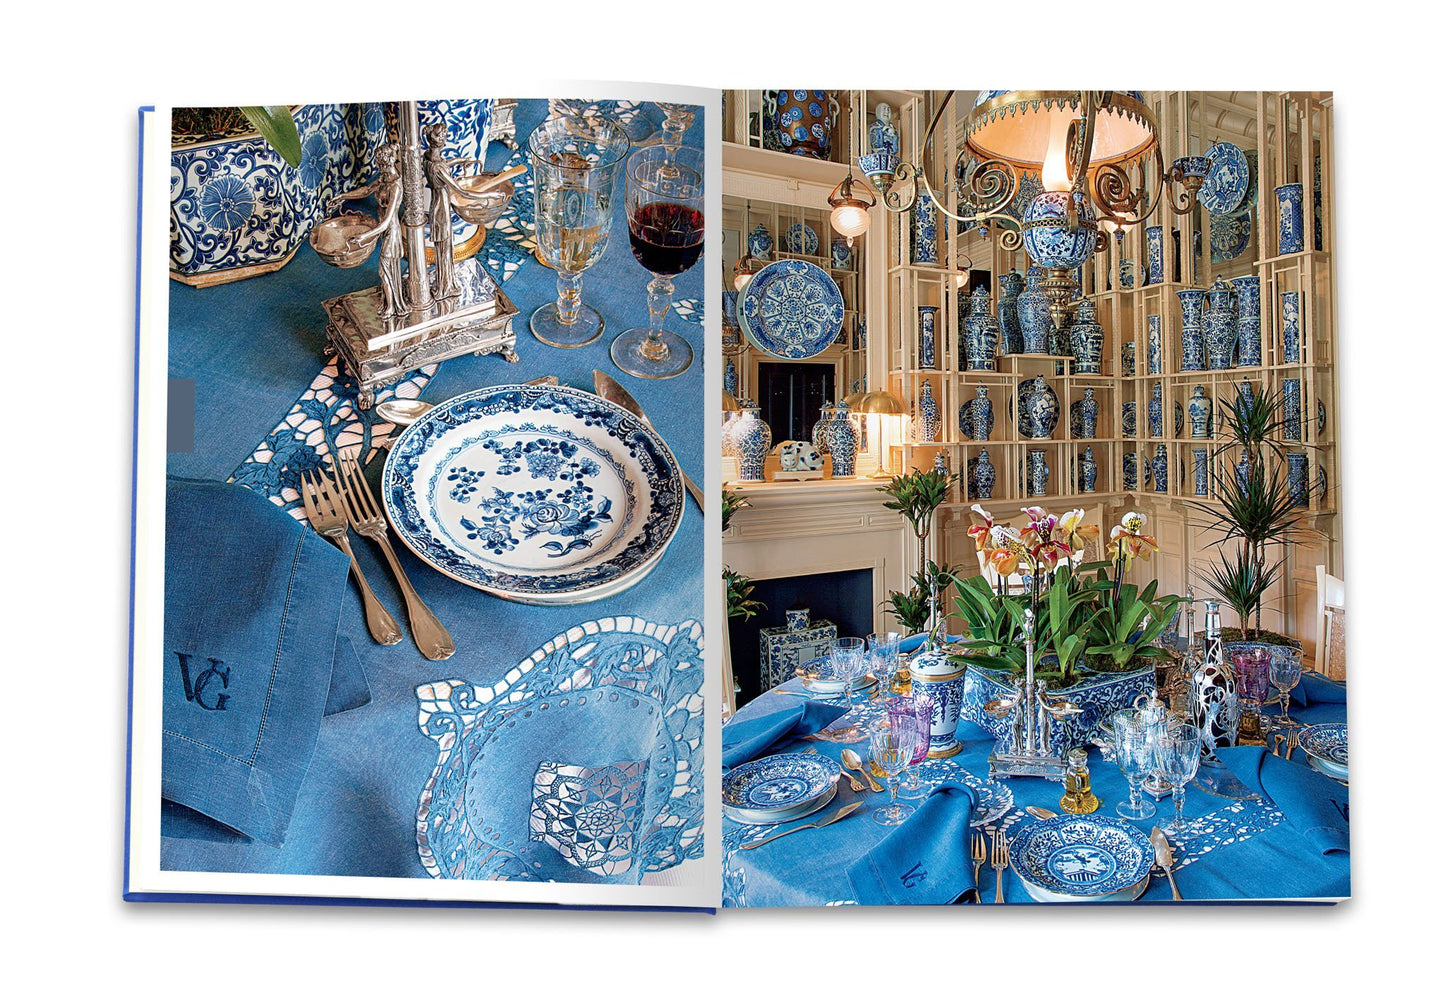 Book Valentino: At the Emperor's Table - Assouline